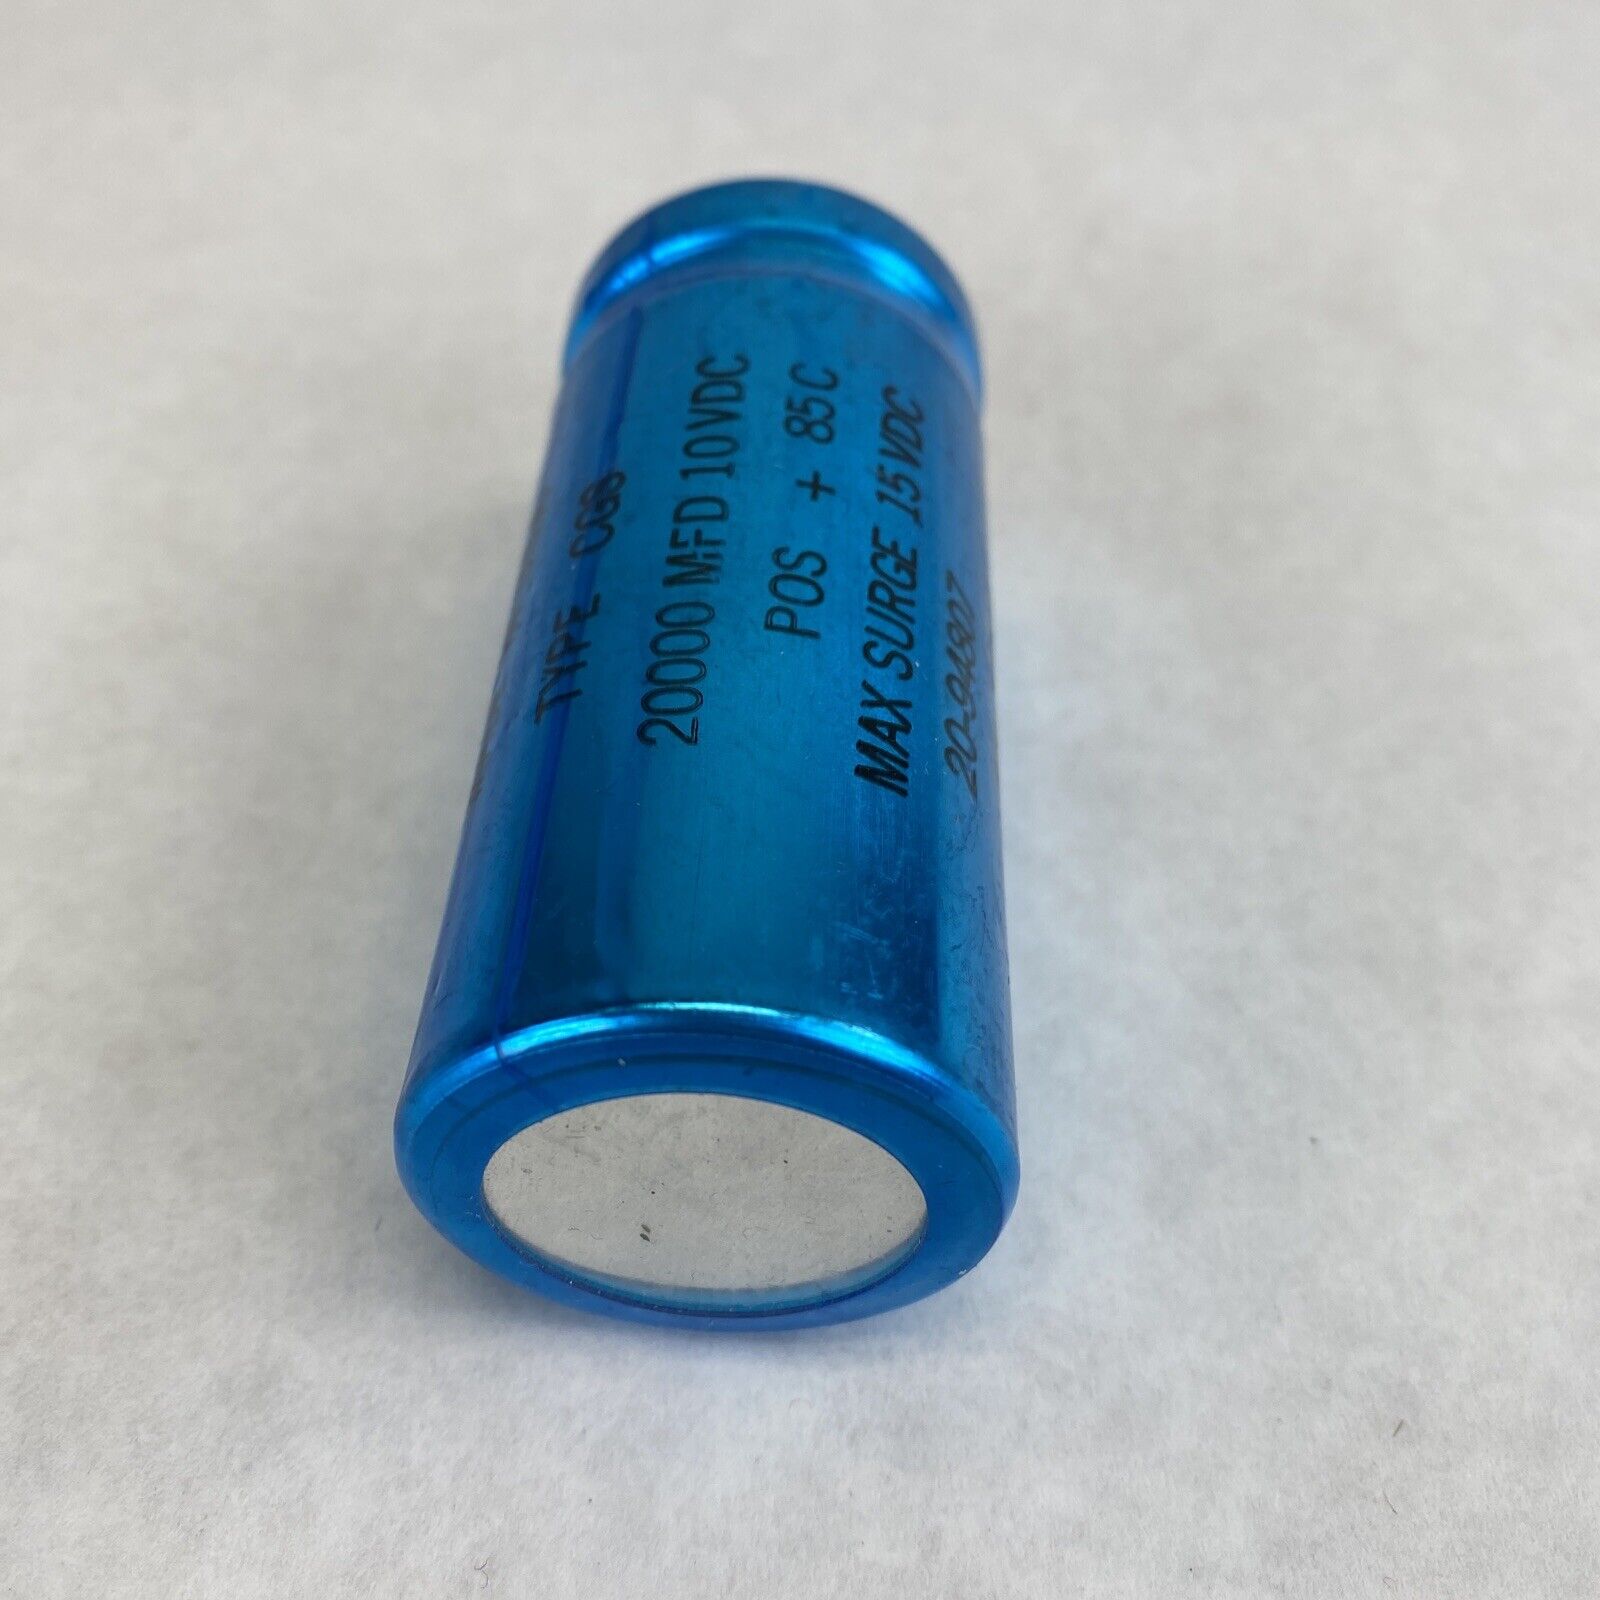 Mallory 235-7751A Electrolytic Capacitor 20000MFD 10VDC